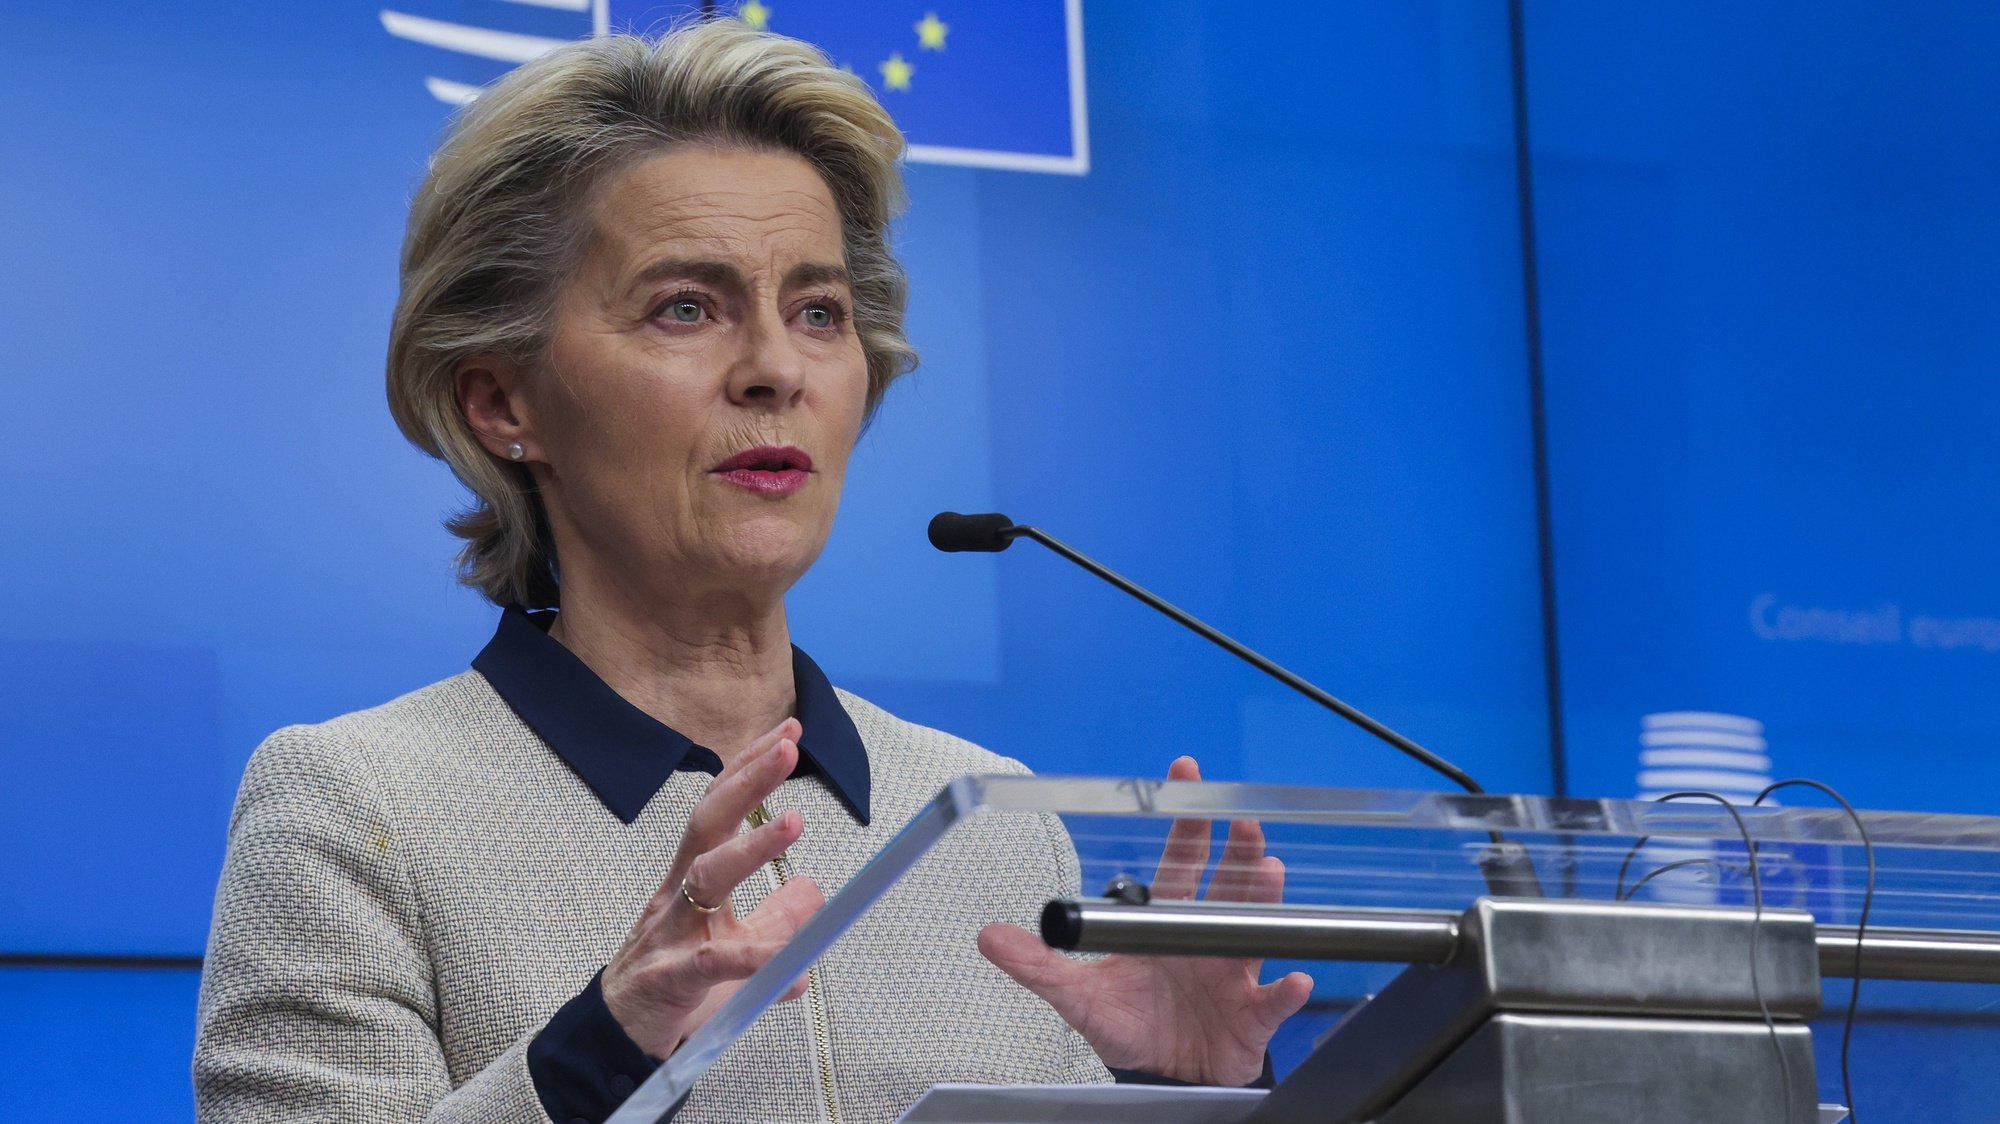 epa08829980 European Commission President Ursula von der Leyen speaks during a news conference following an EU Summit video conference at the European Council building in Brussels, Belgium, 19 November 2020.  EPA/OLIVIER MATTHYS / POOL